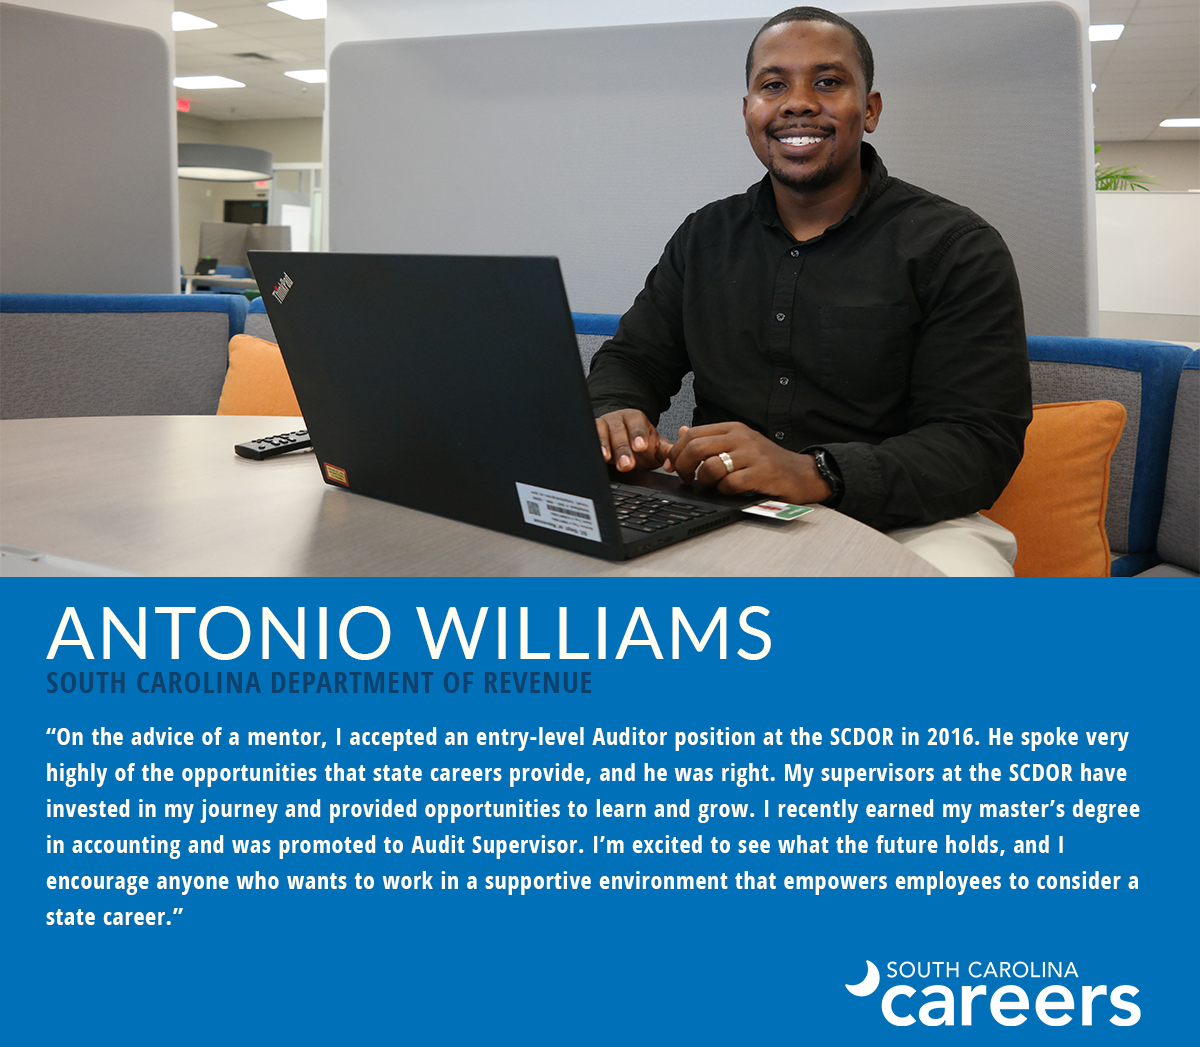 Antonio Williams South Carolina Department of Revenue "On the advice of a mentor, I accepted an entry-level Auditor position at the SCDOR in 2016. He spoke very highly of the opportunities that state careers provide, and he was right. My supervisors at the SCDOR have invested in my journey and provided opportunities to learn and grow. I recently earned my master's degree in accounting and was promoted to Audit Supervisor. I'm excited to see what the future holds, and I encourage anyone who wants to work in a supportive environment that empowers employees to consider a state career."